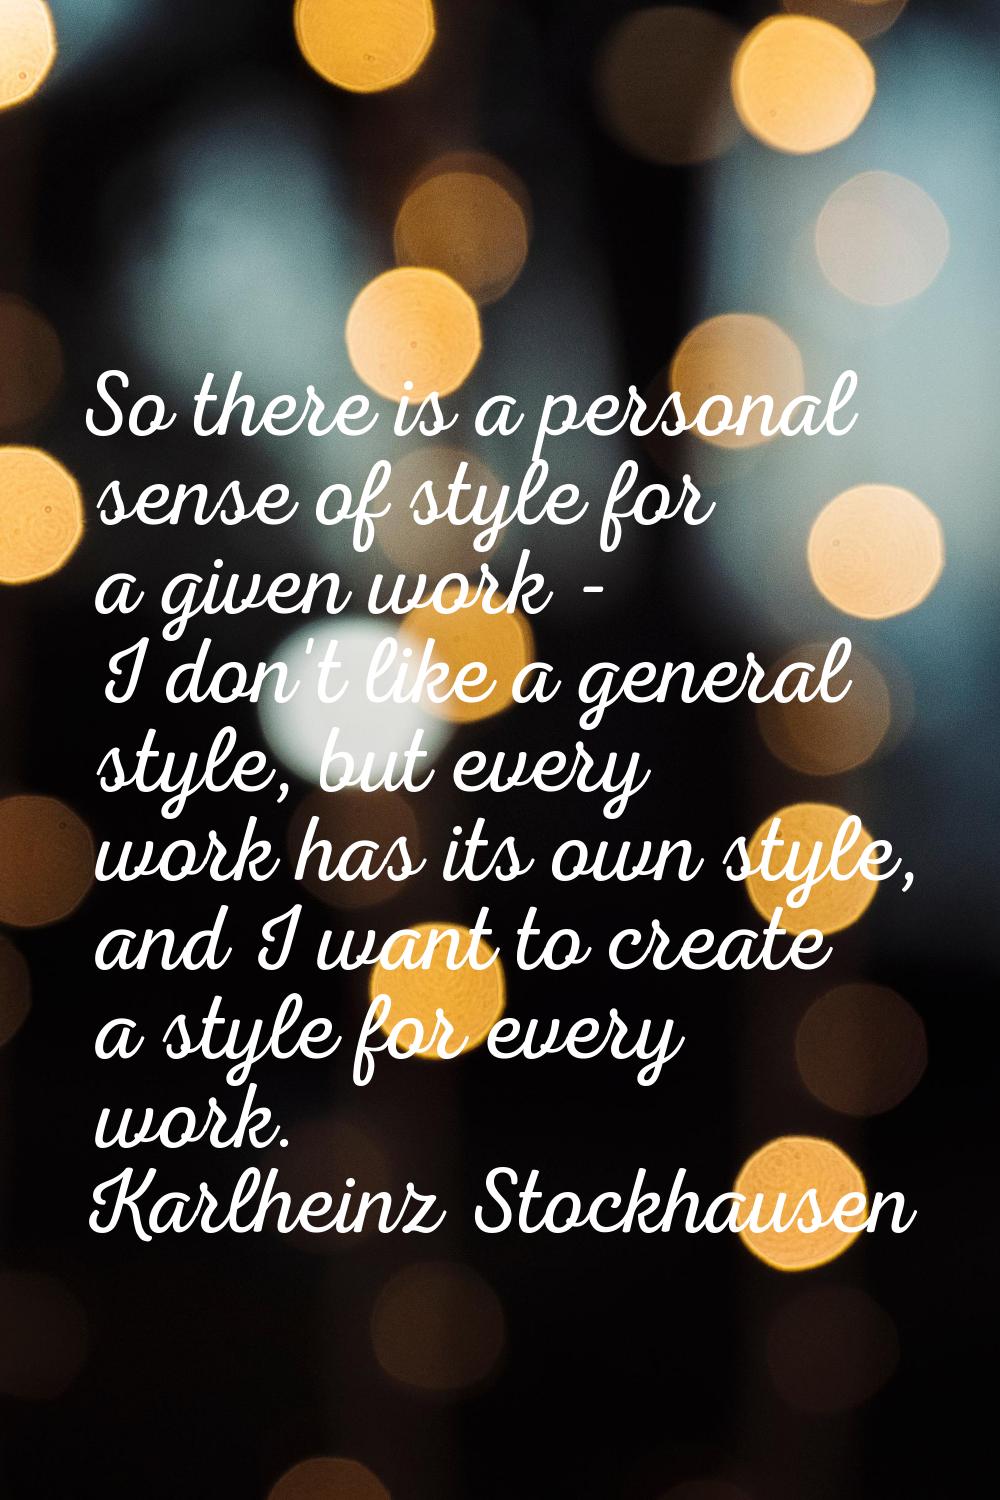 So there is a personal sense of style for a given work - I don't like a general style, but every wo